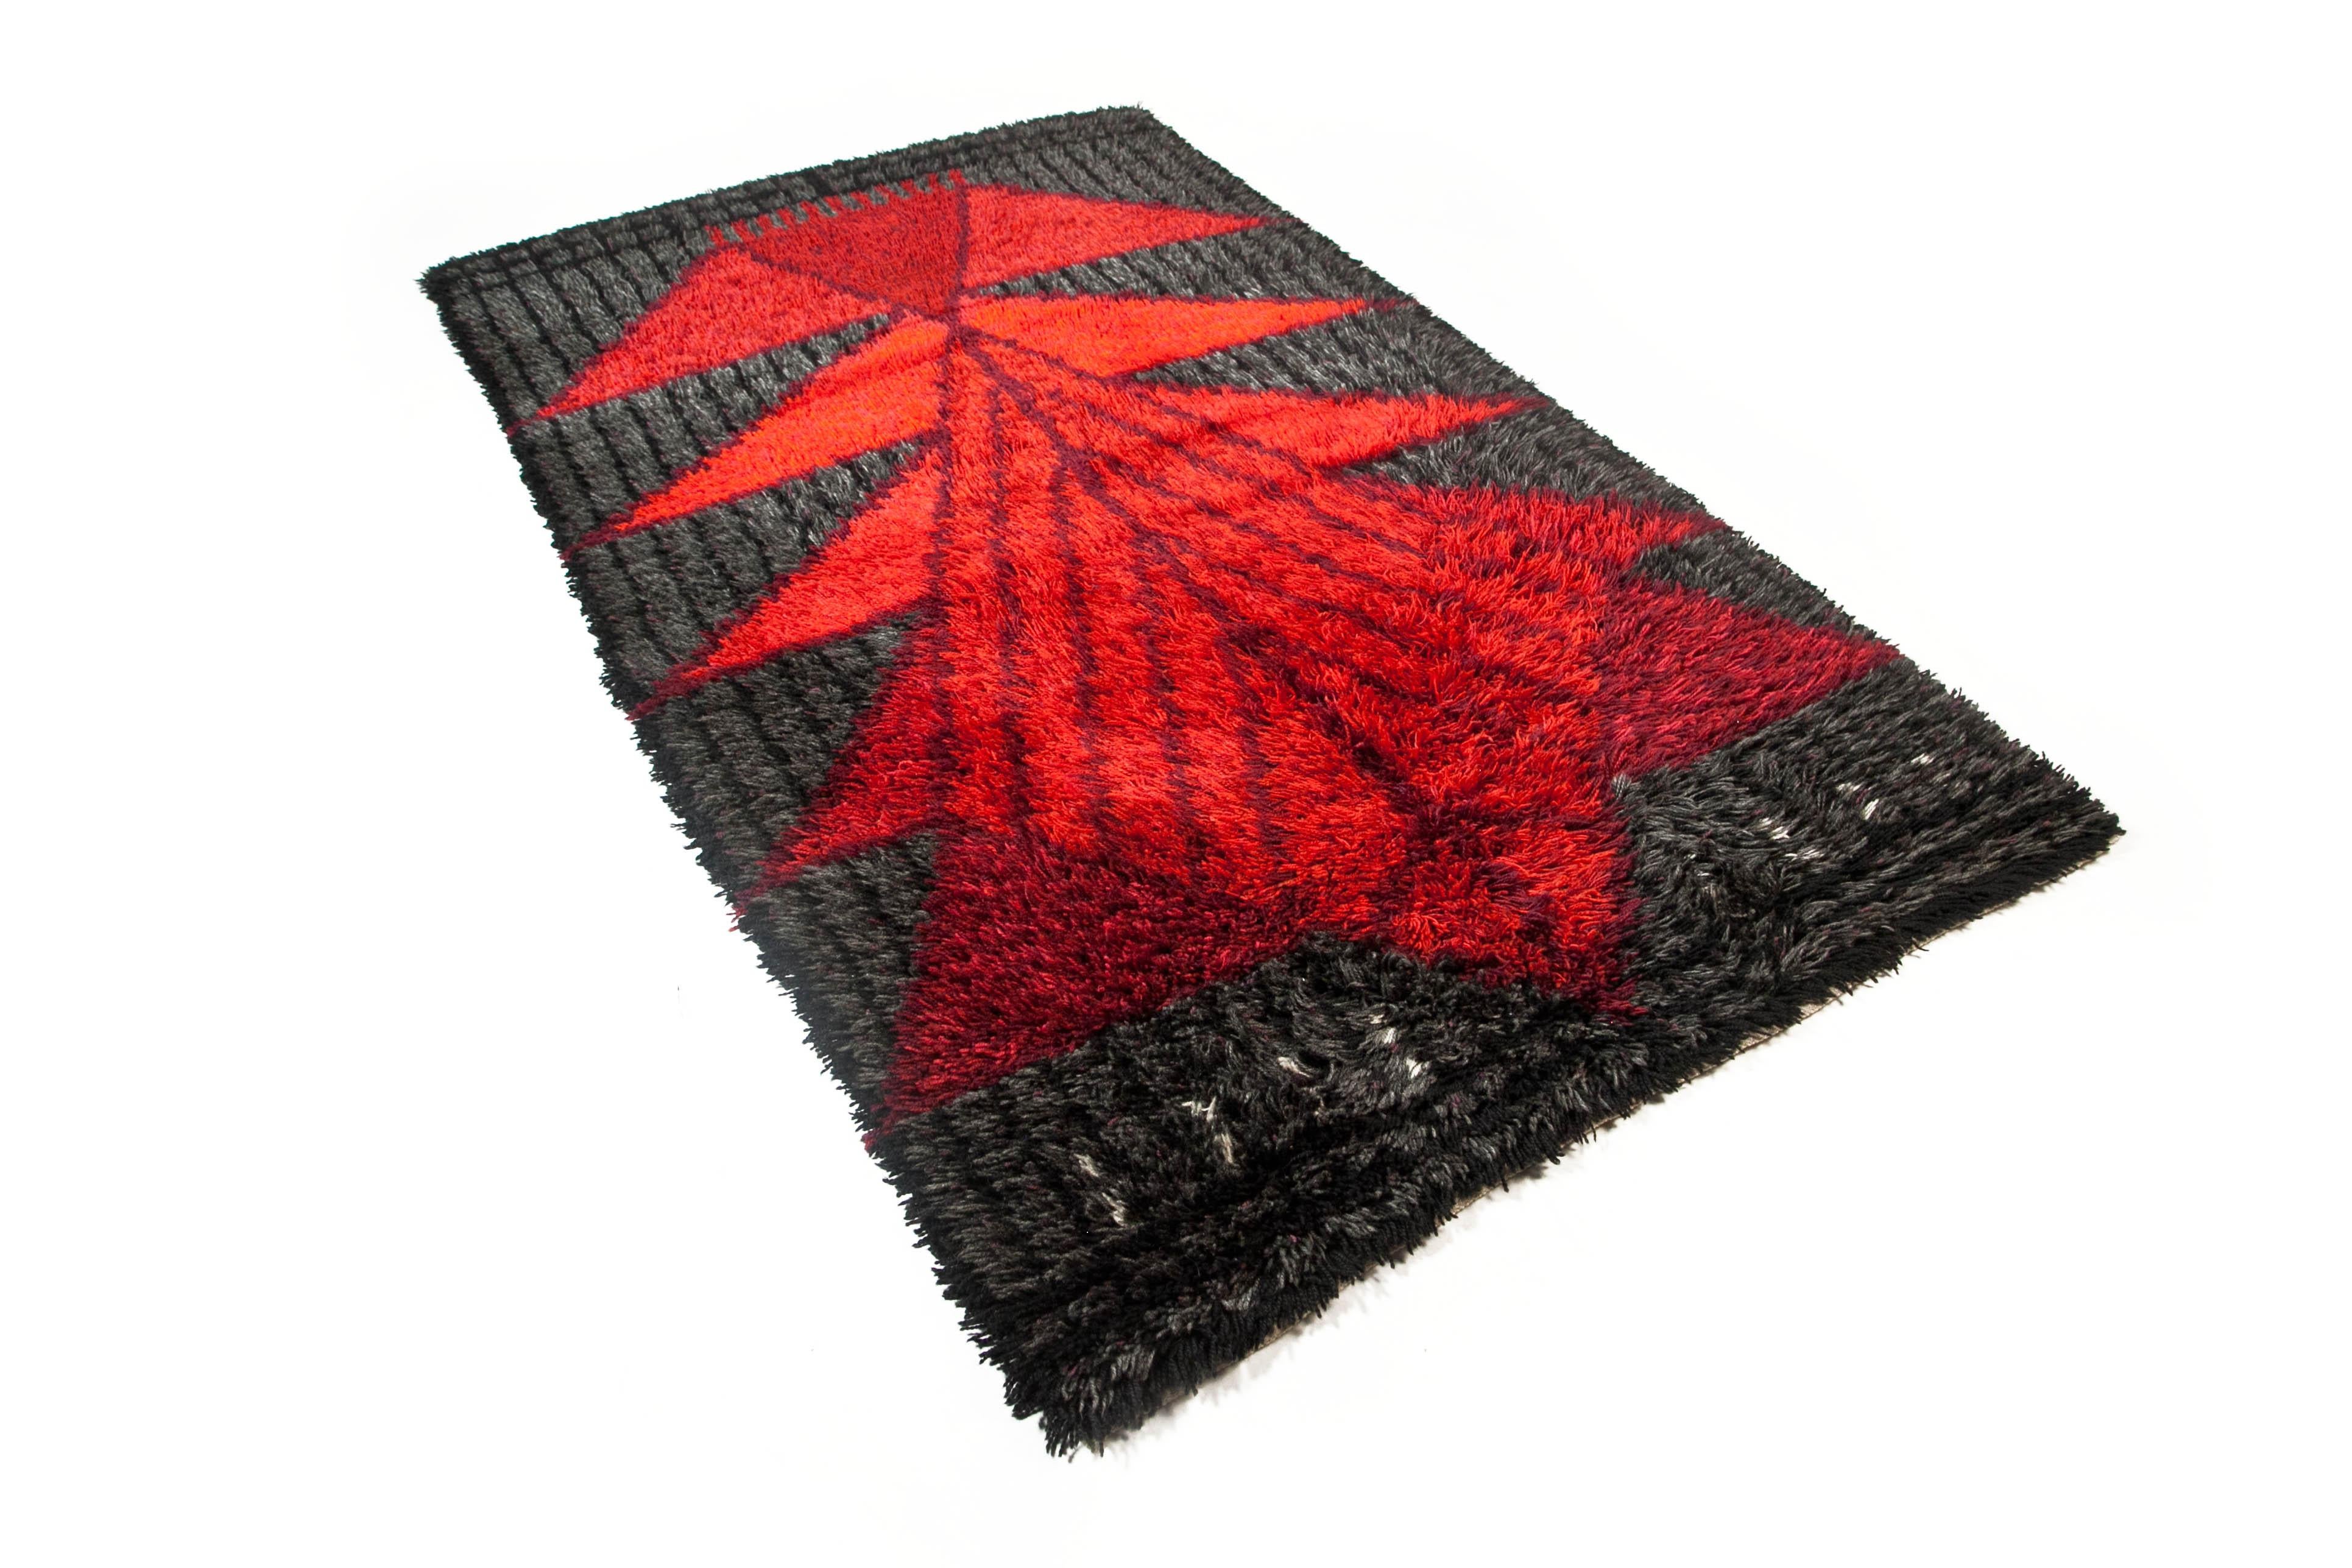 Late 20th Century Vintage Swedish Rya Rug, Dark Grey and Red Patterned, Sweden, 1970s